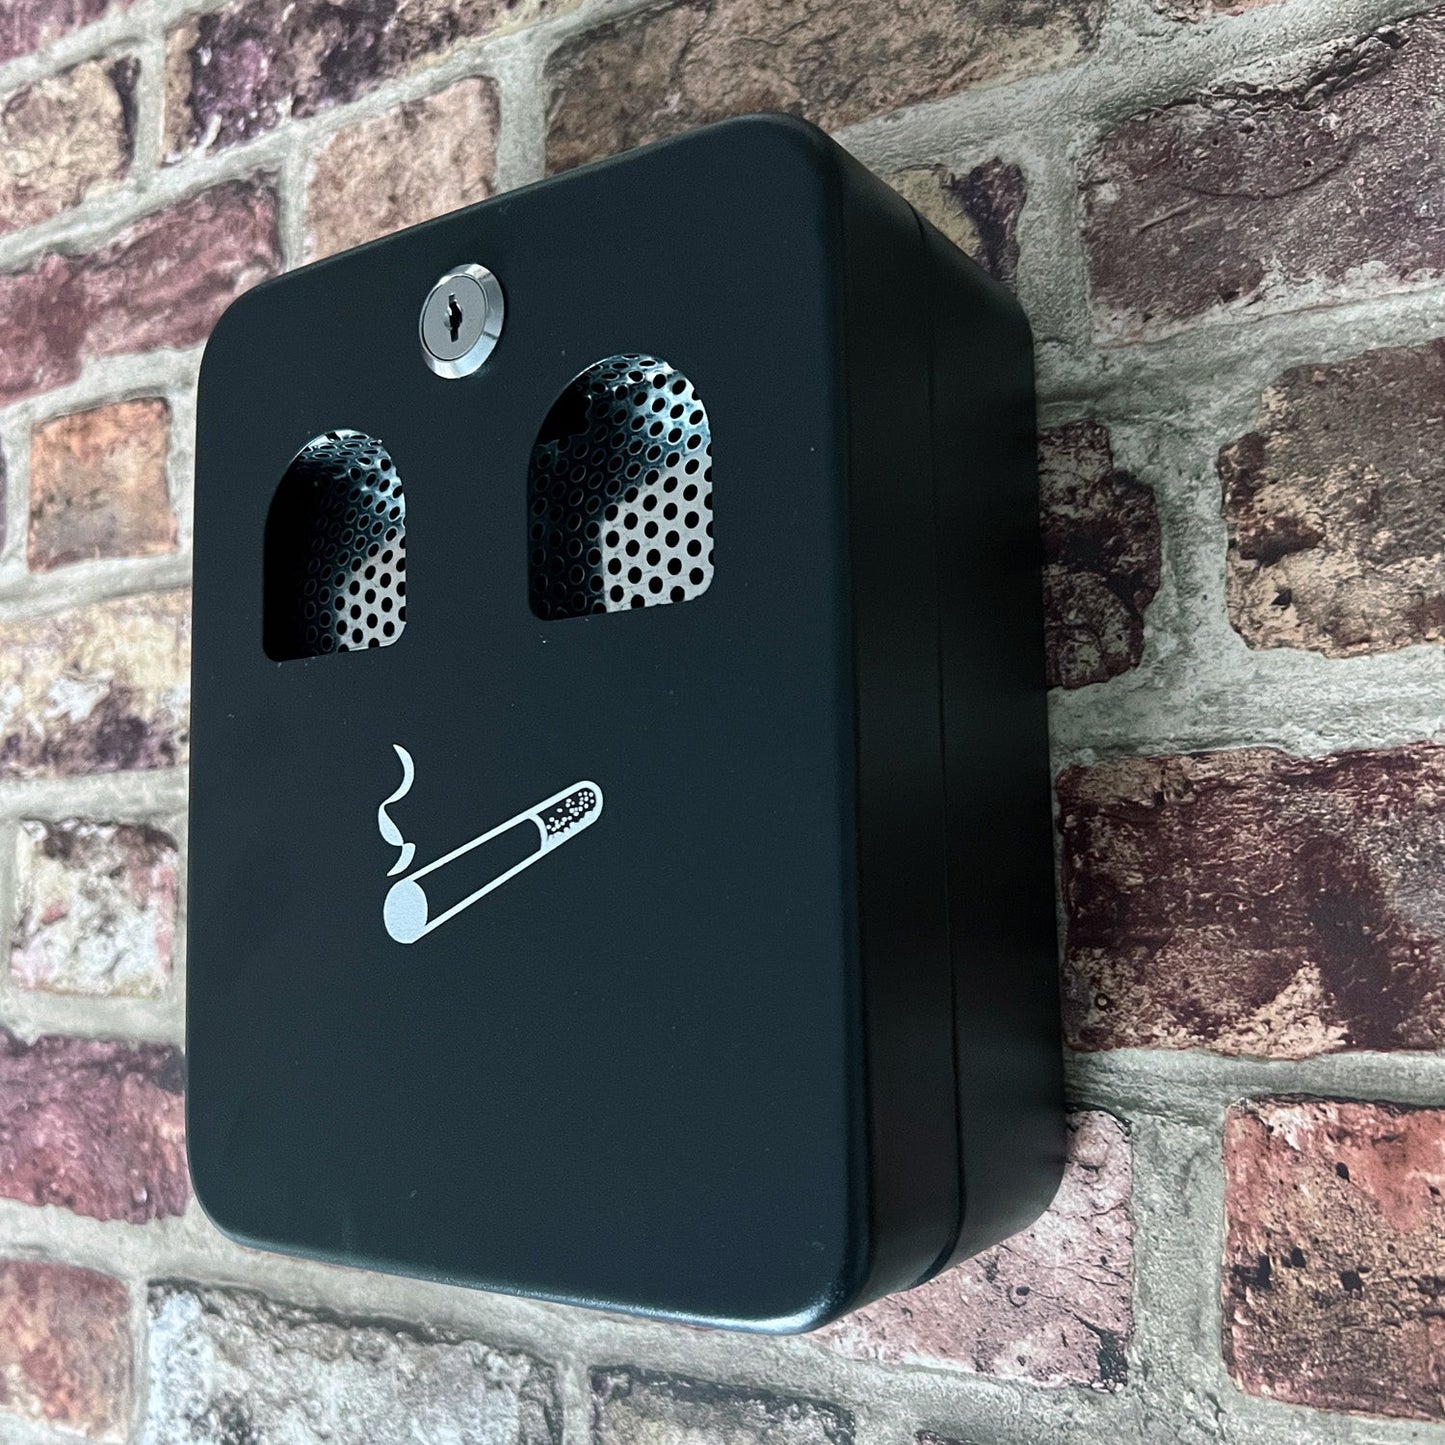 A wall-mounted ash bin with a 1.0L capacity, installed on a brick wall. The matte black bin features a cigarette icon and two perforated metal inserts for cigarette disposal, with a secure lock at the top.